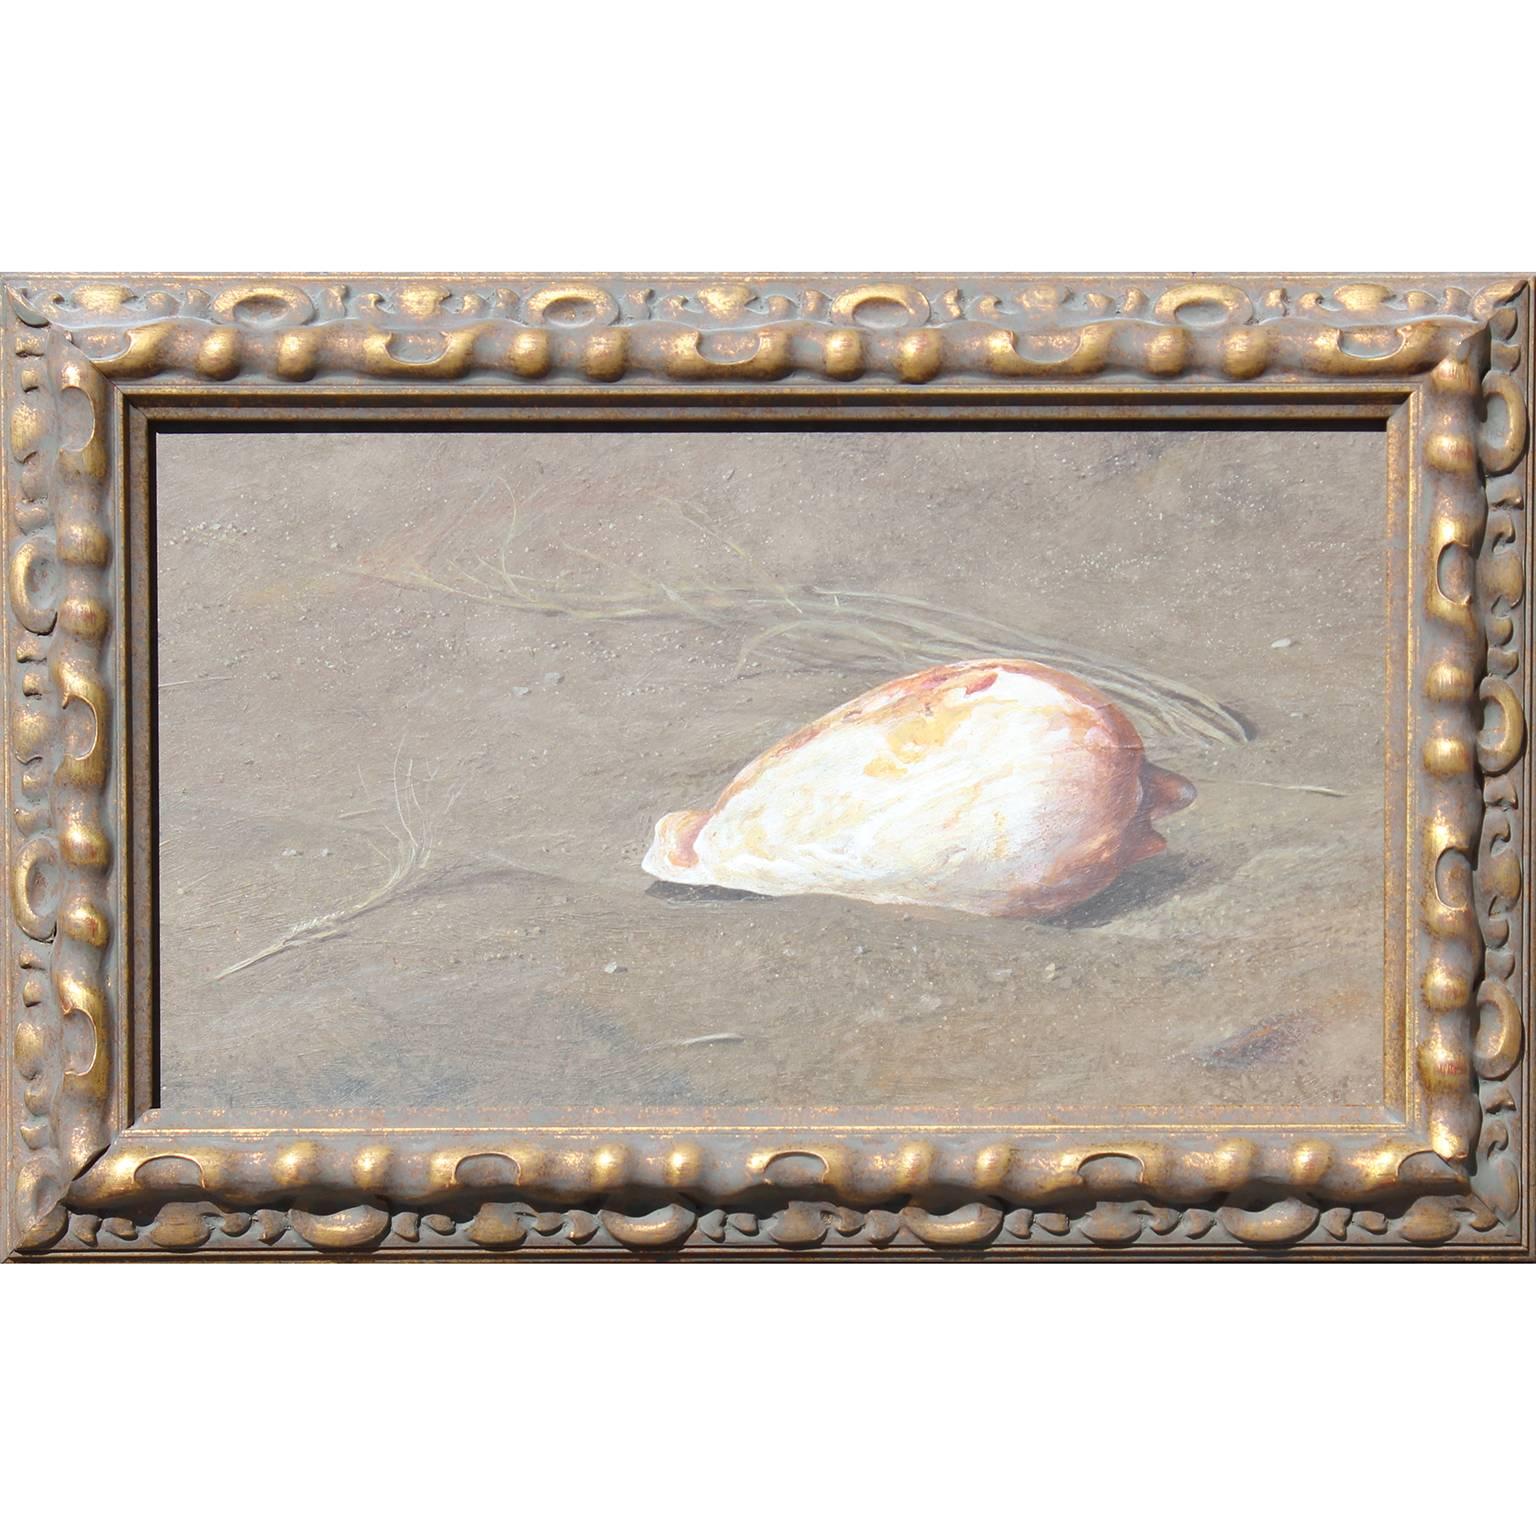 Kermit Oliver Still-Life Painting - Early Still Life of a Shell